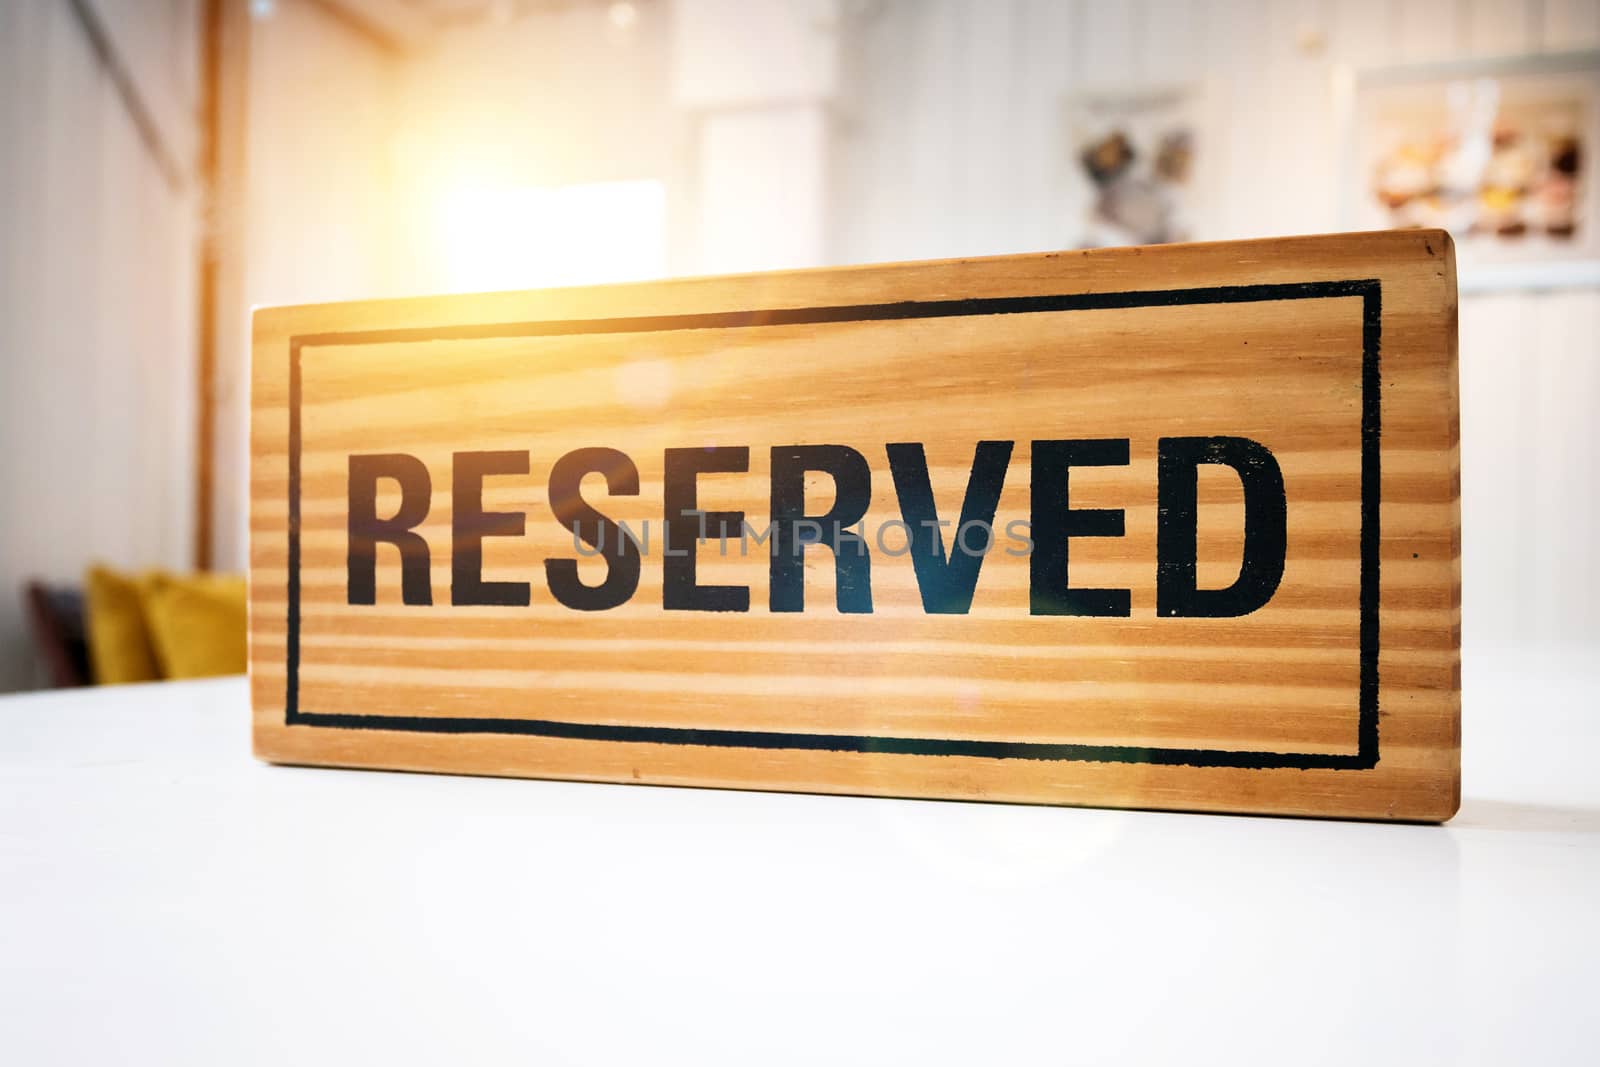 Reservation seat at restaurant for dating on celebrate day concept. Restaurant with reserved wooden sign on white table with cafe decorate places setting and evening light with bokeh for dinner time by asiandelight